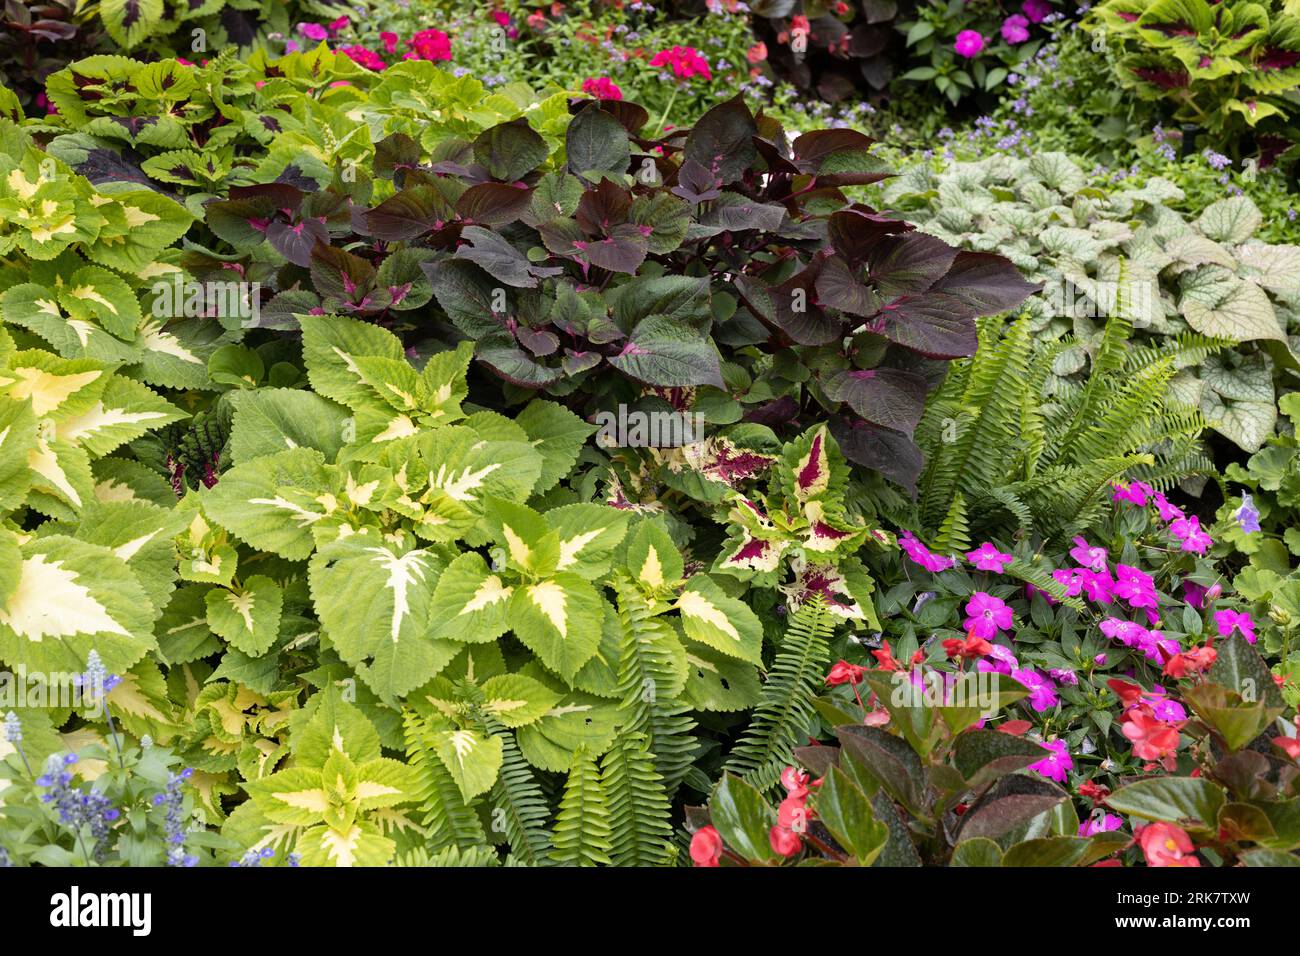 A close up of a colorful garden full of coleus and geranium plants. Stock Photo